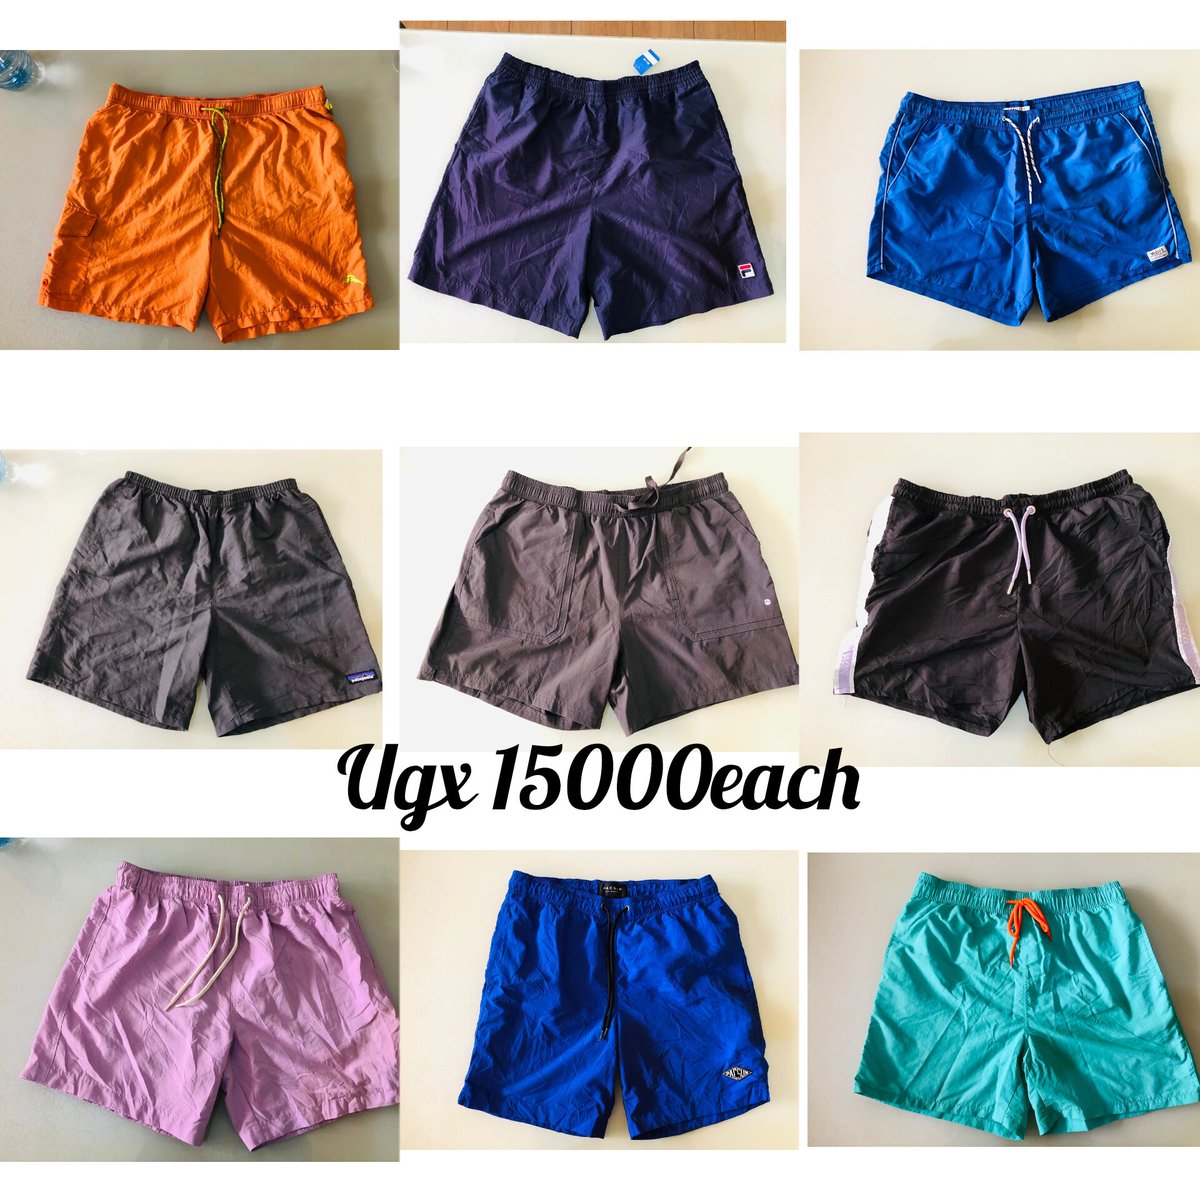 In this short shorts era, you deserve to own more than enough, can't be showing up for game nights, rugby or soccer in the same shorts every weekend🤭 DM @Elbetabeta or call 0704464623 and get yourself one or two or many, the weekend is almost here😊